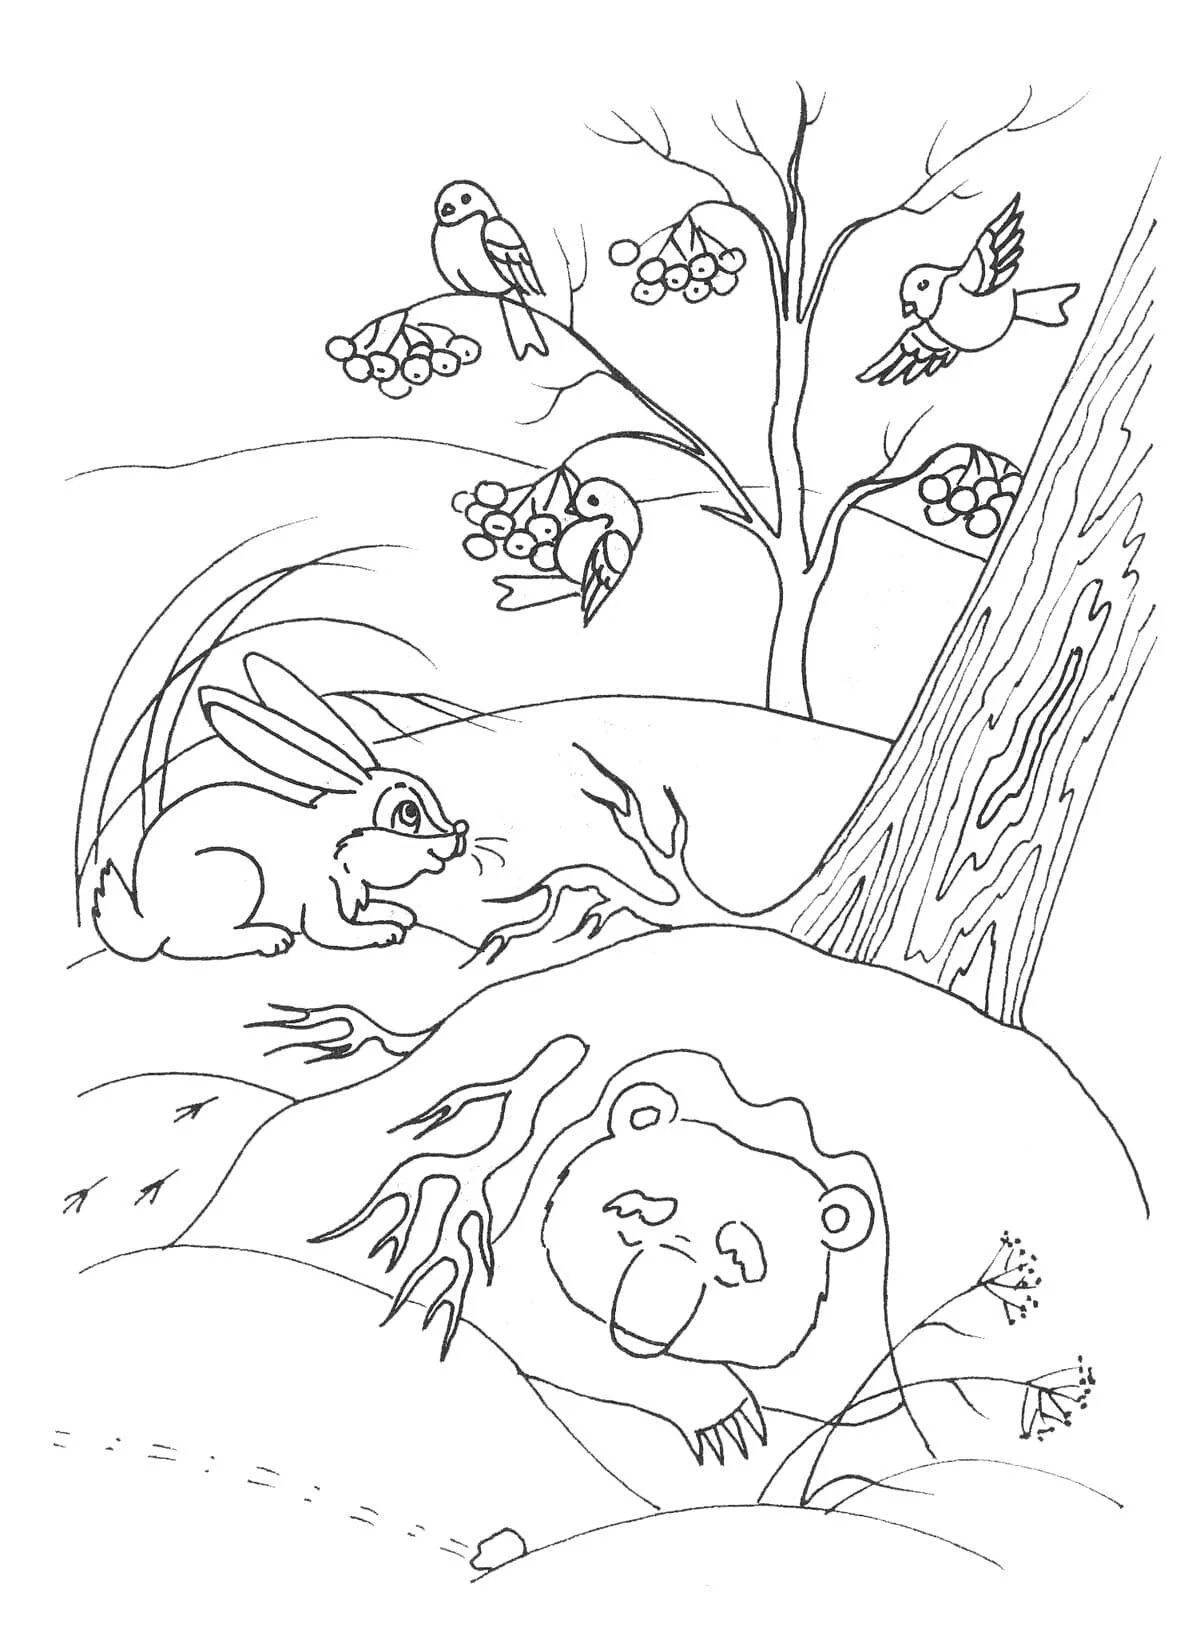 Great coloring book: why do bears sleep in winter?